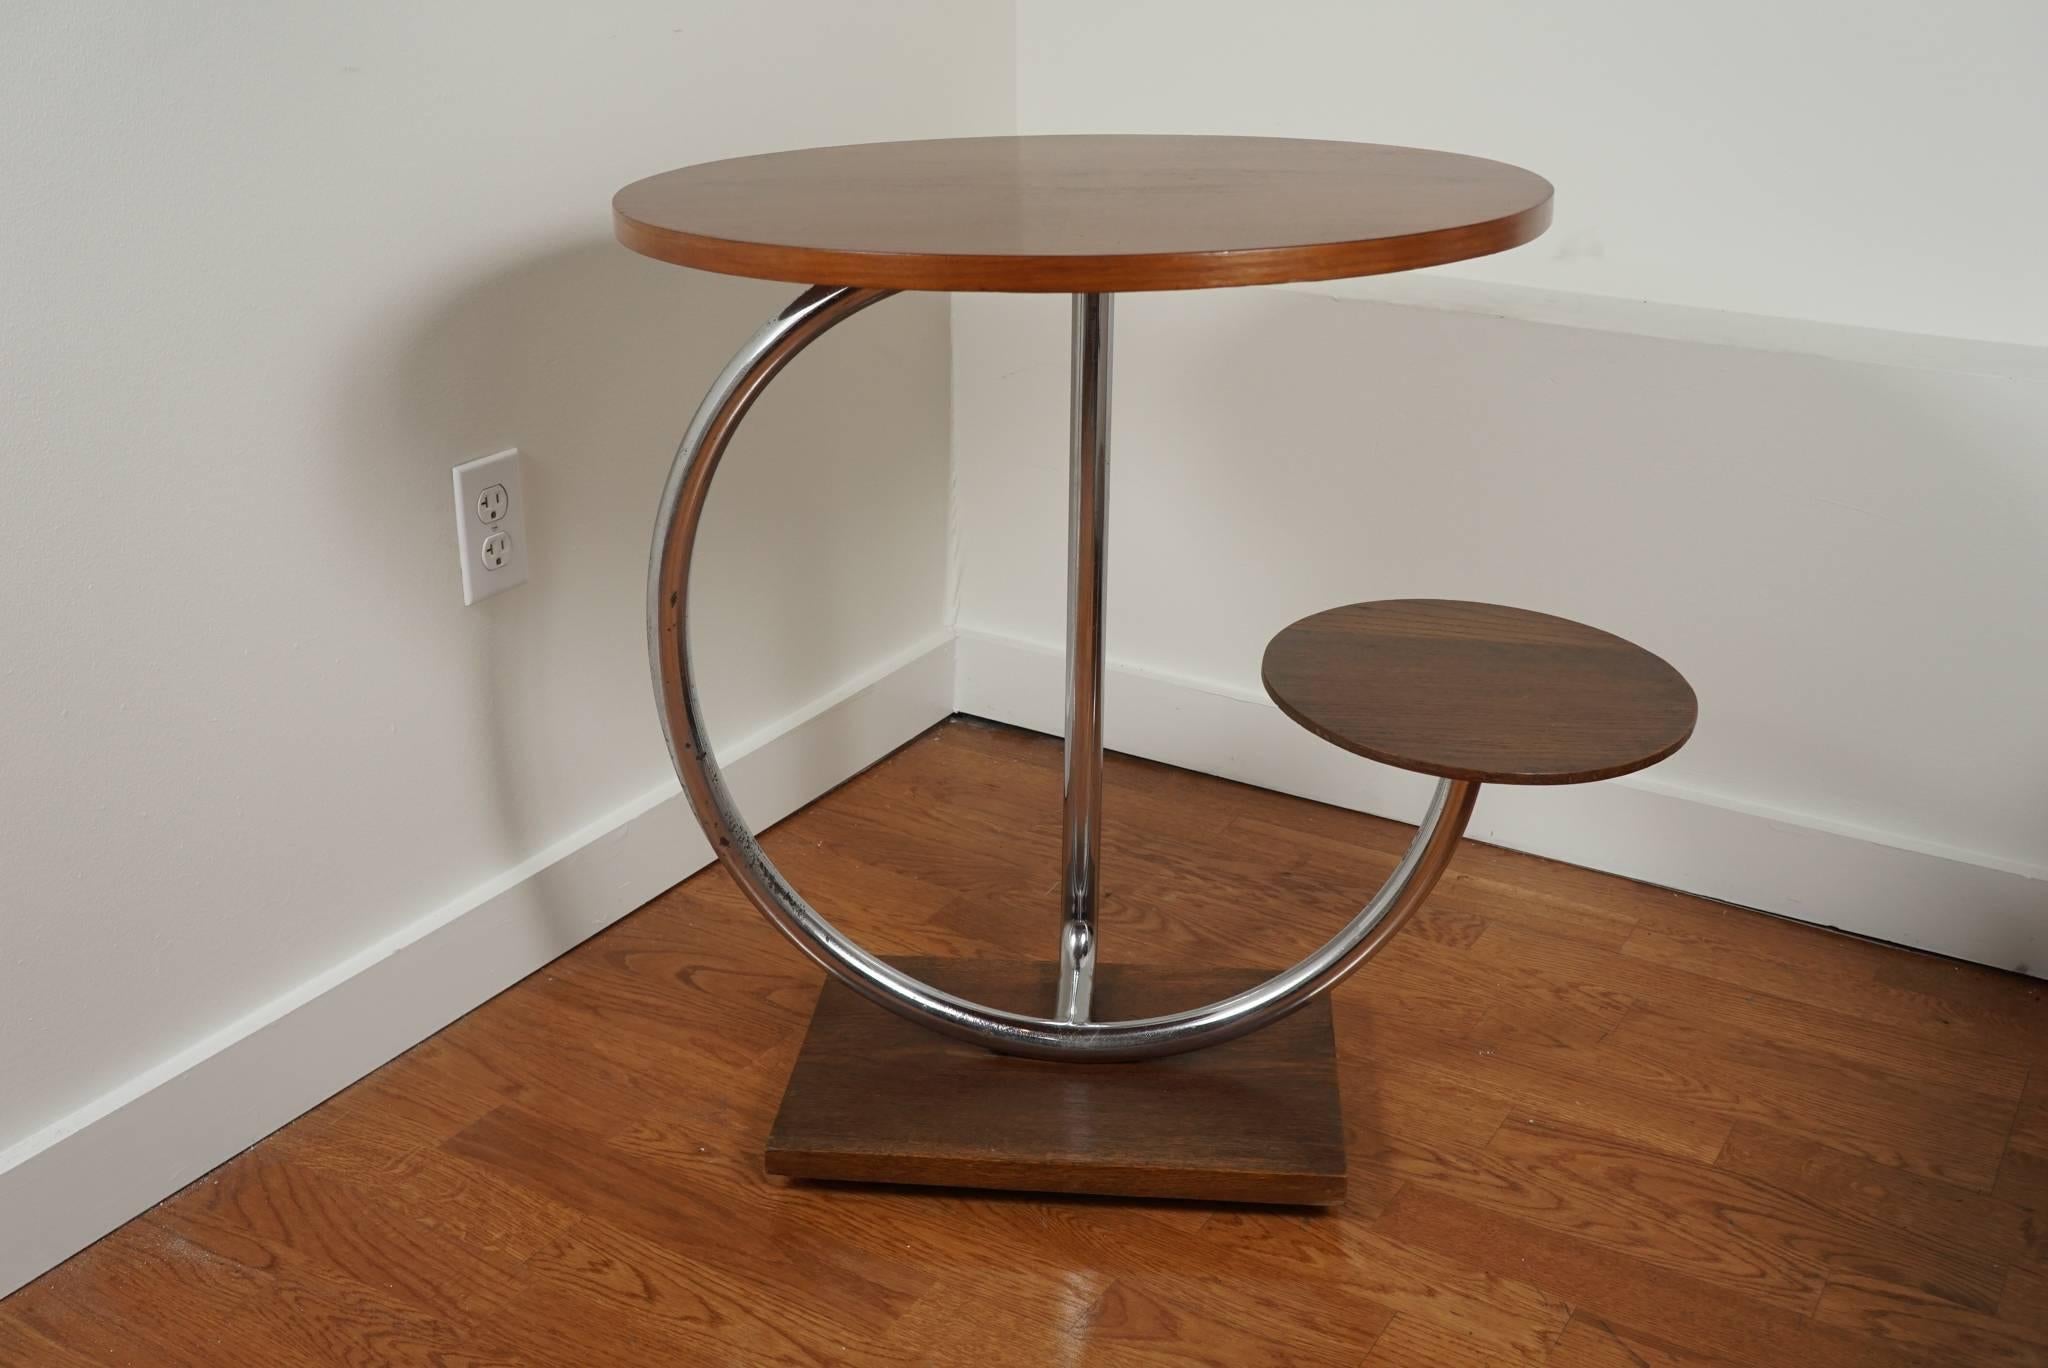 Super fun, and extremely unusual! Art Deco oak table with attached seat on a polished chrome frame.